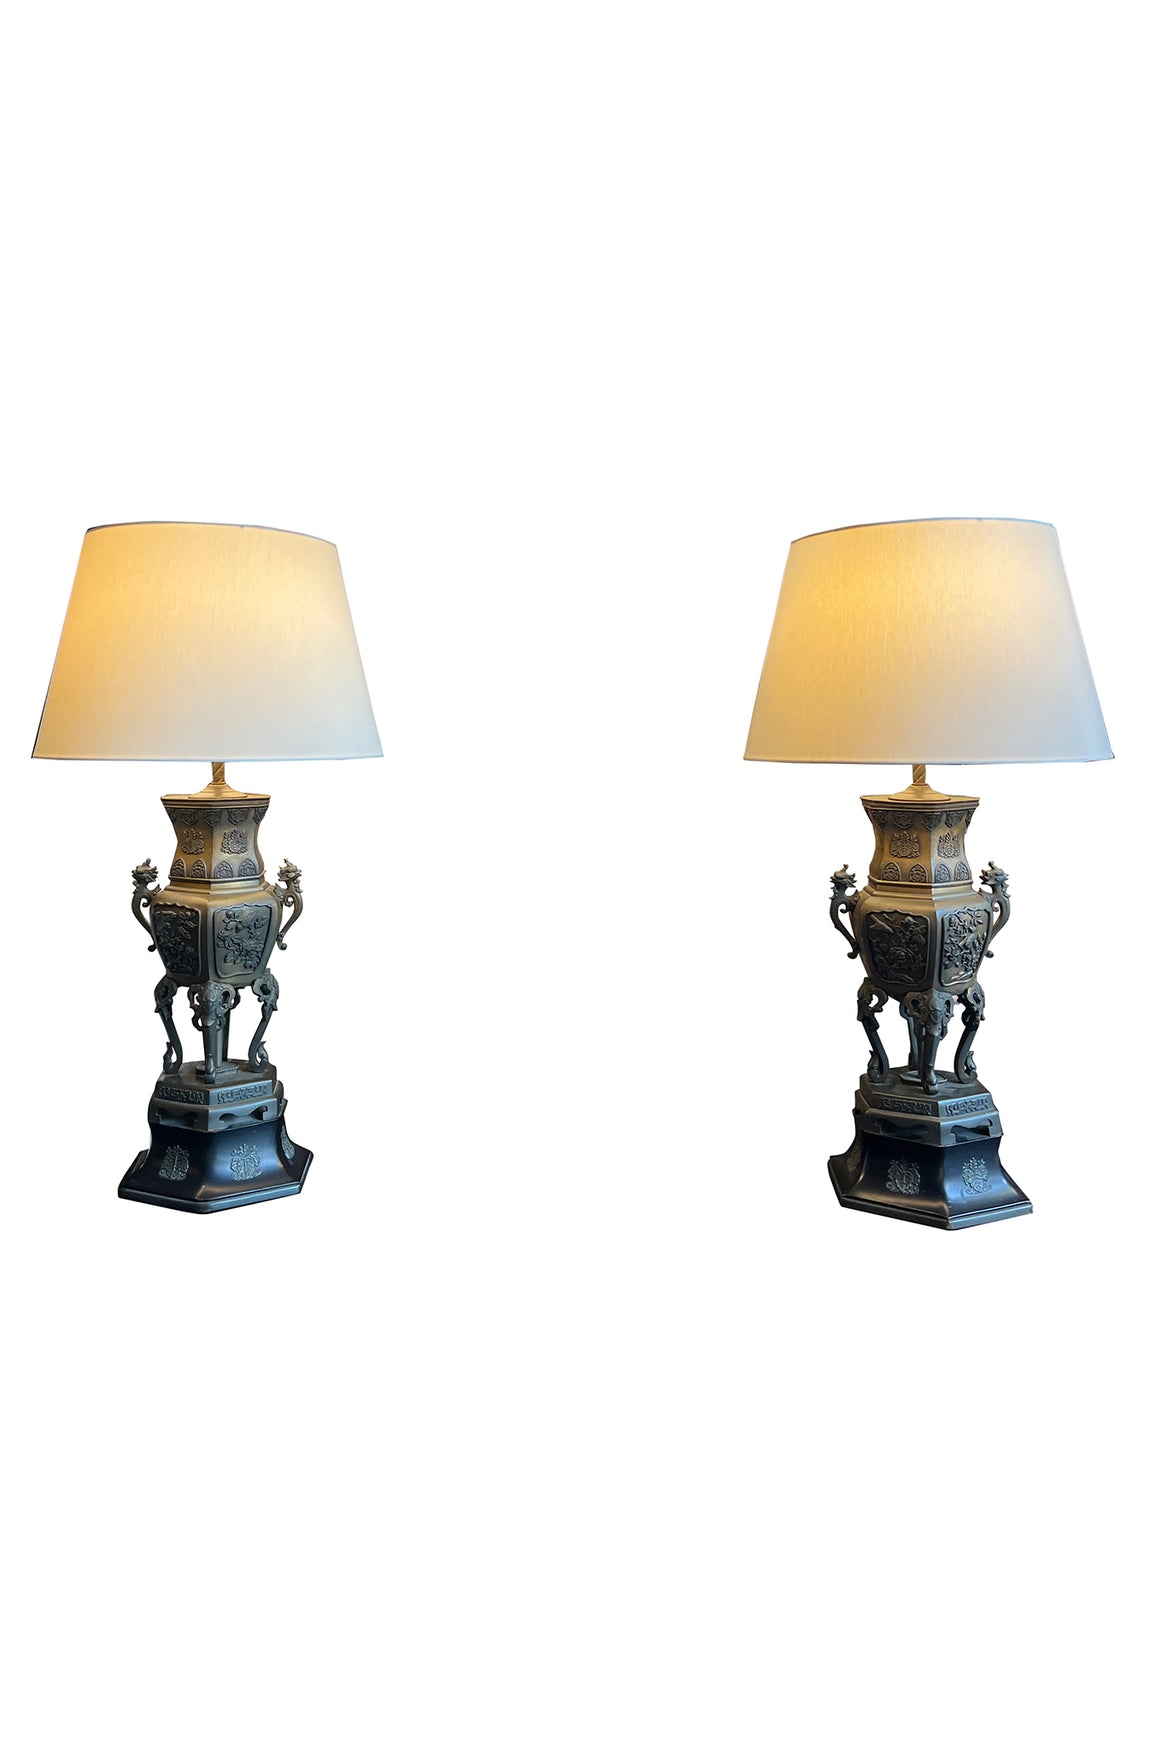 Pair of Chinese Bronze Table Lamps in the Style of James Mont